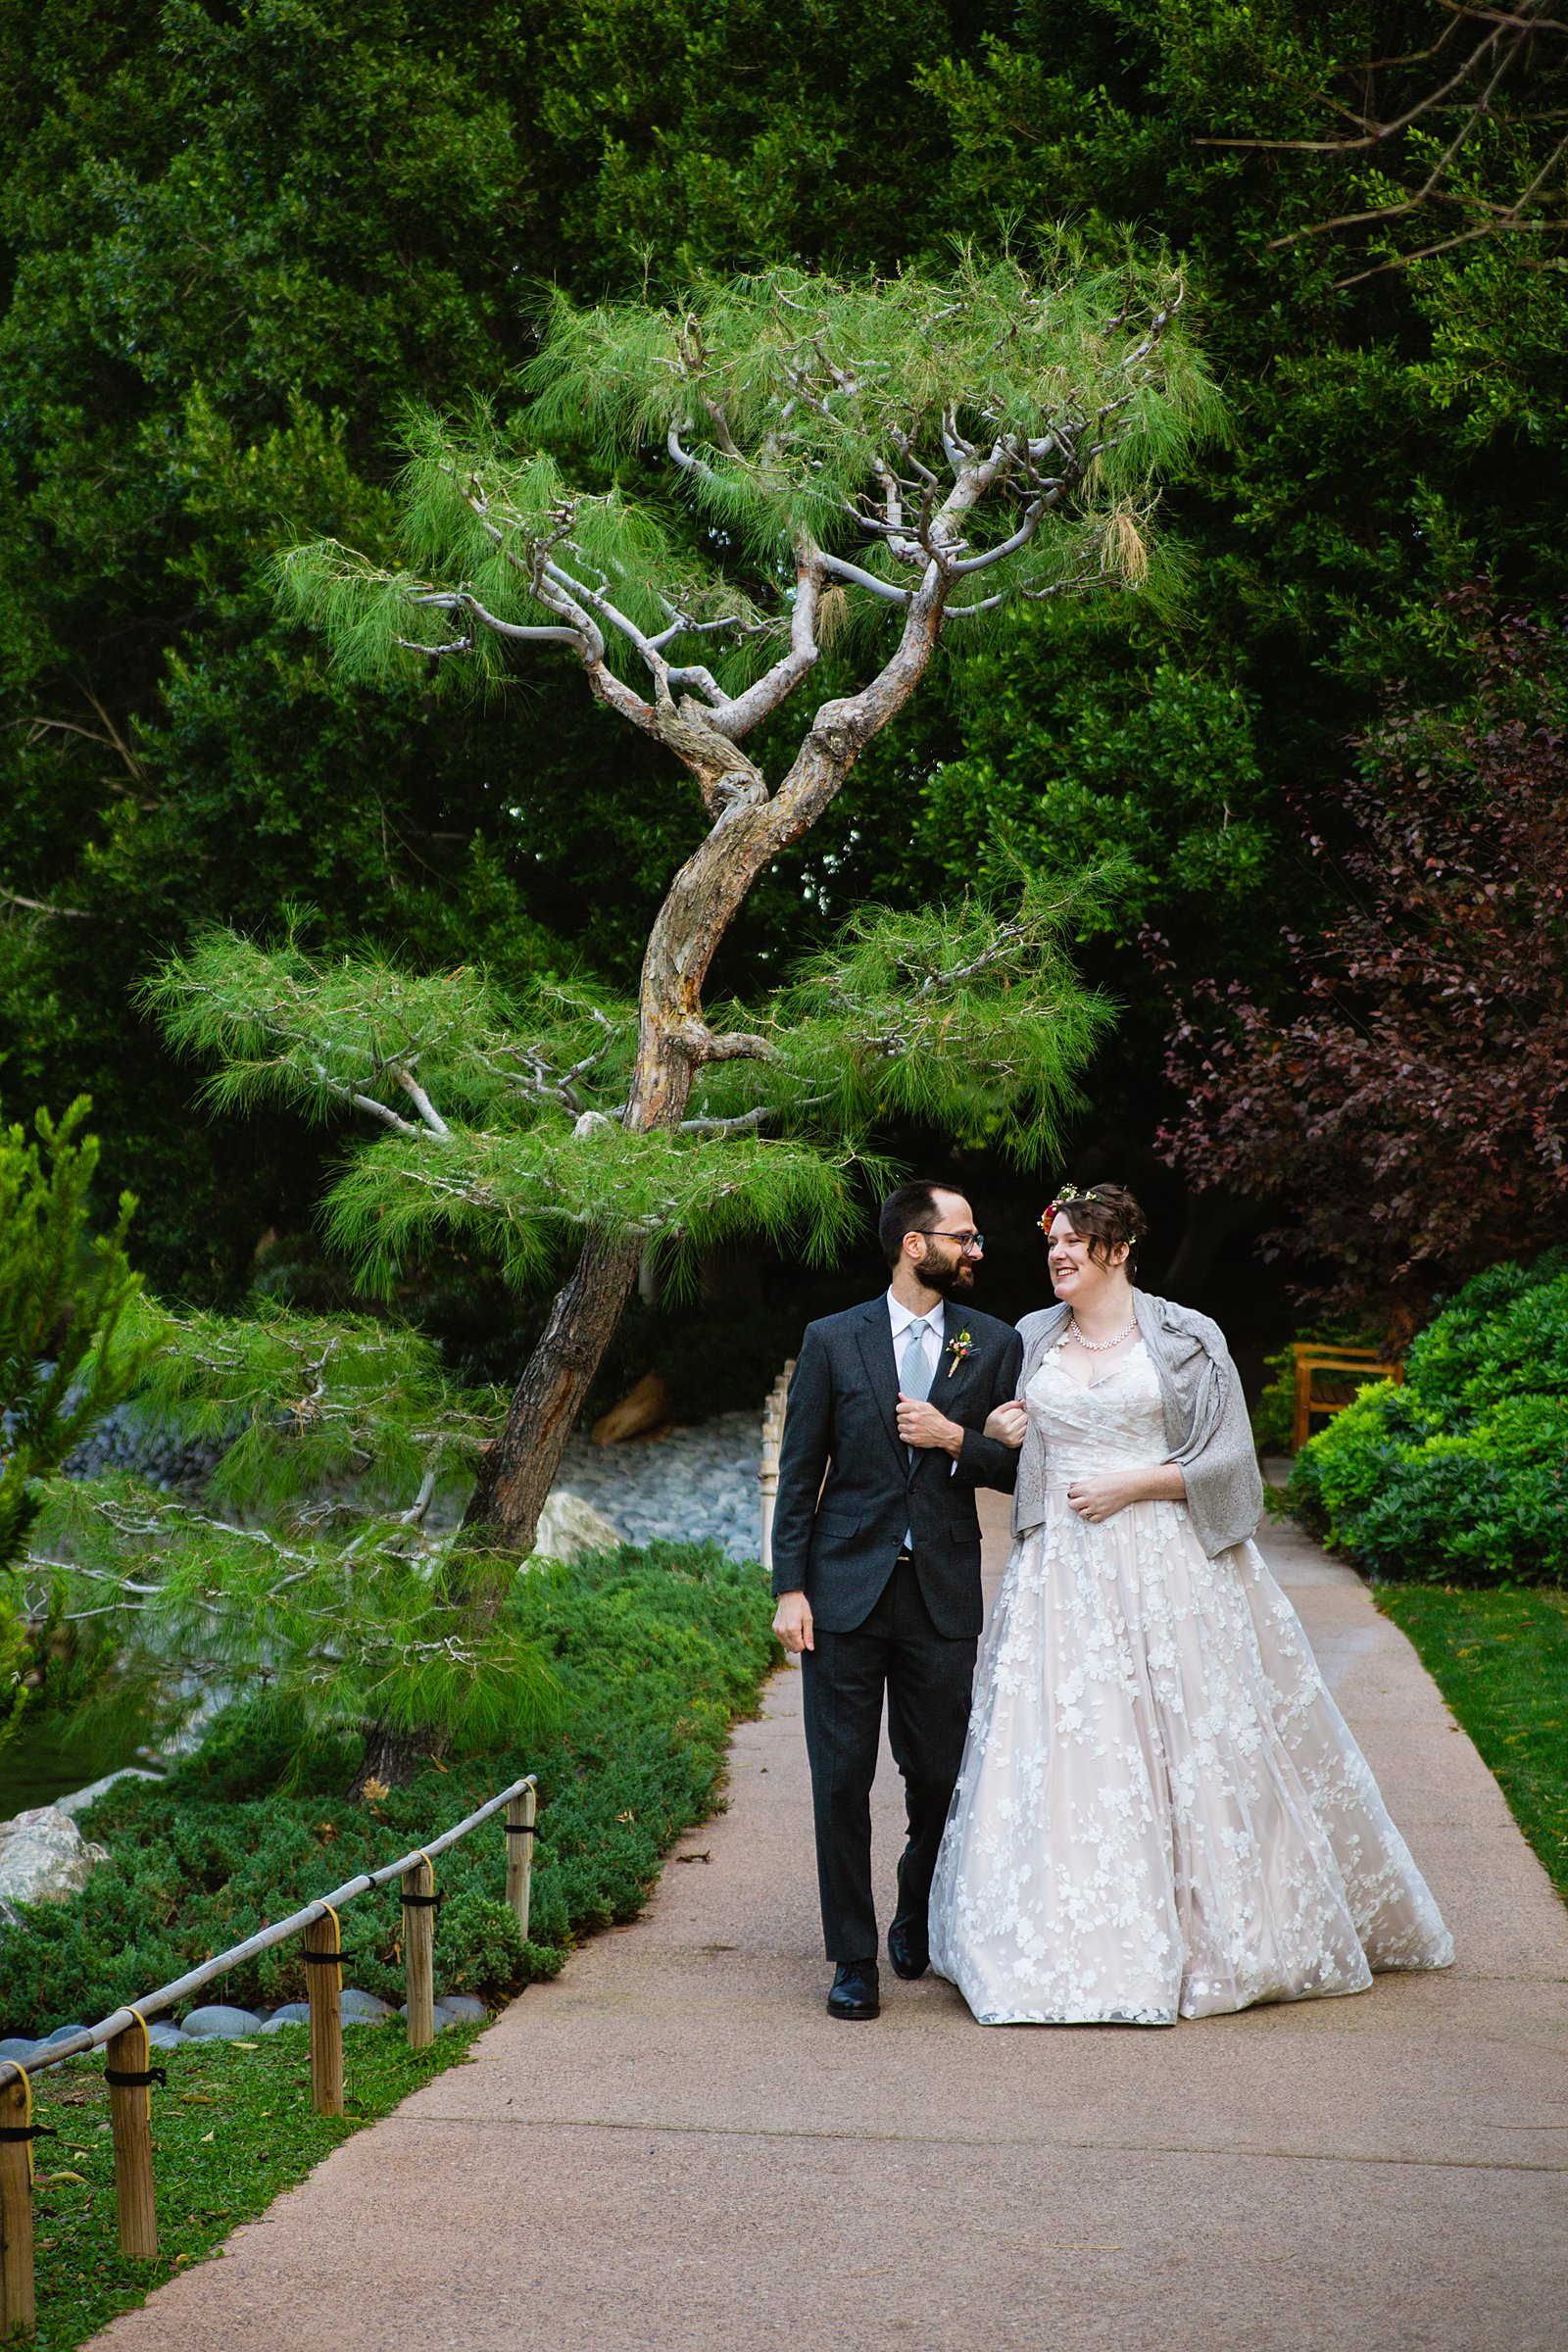 Bride and Groom walking together during their Japanese Friendship Garden wedding by Phoenix wedding photographer PMA Photography.